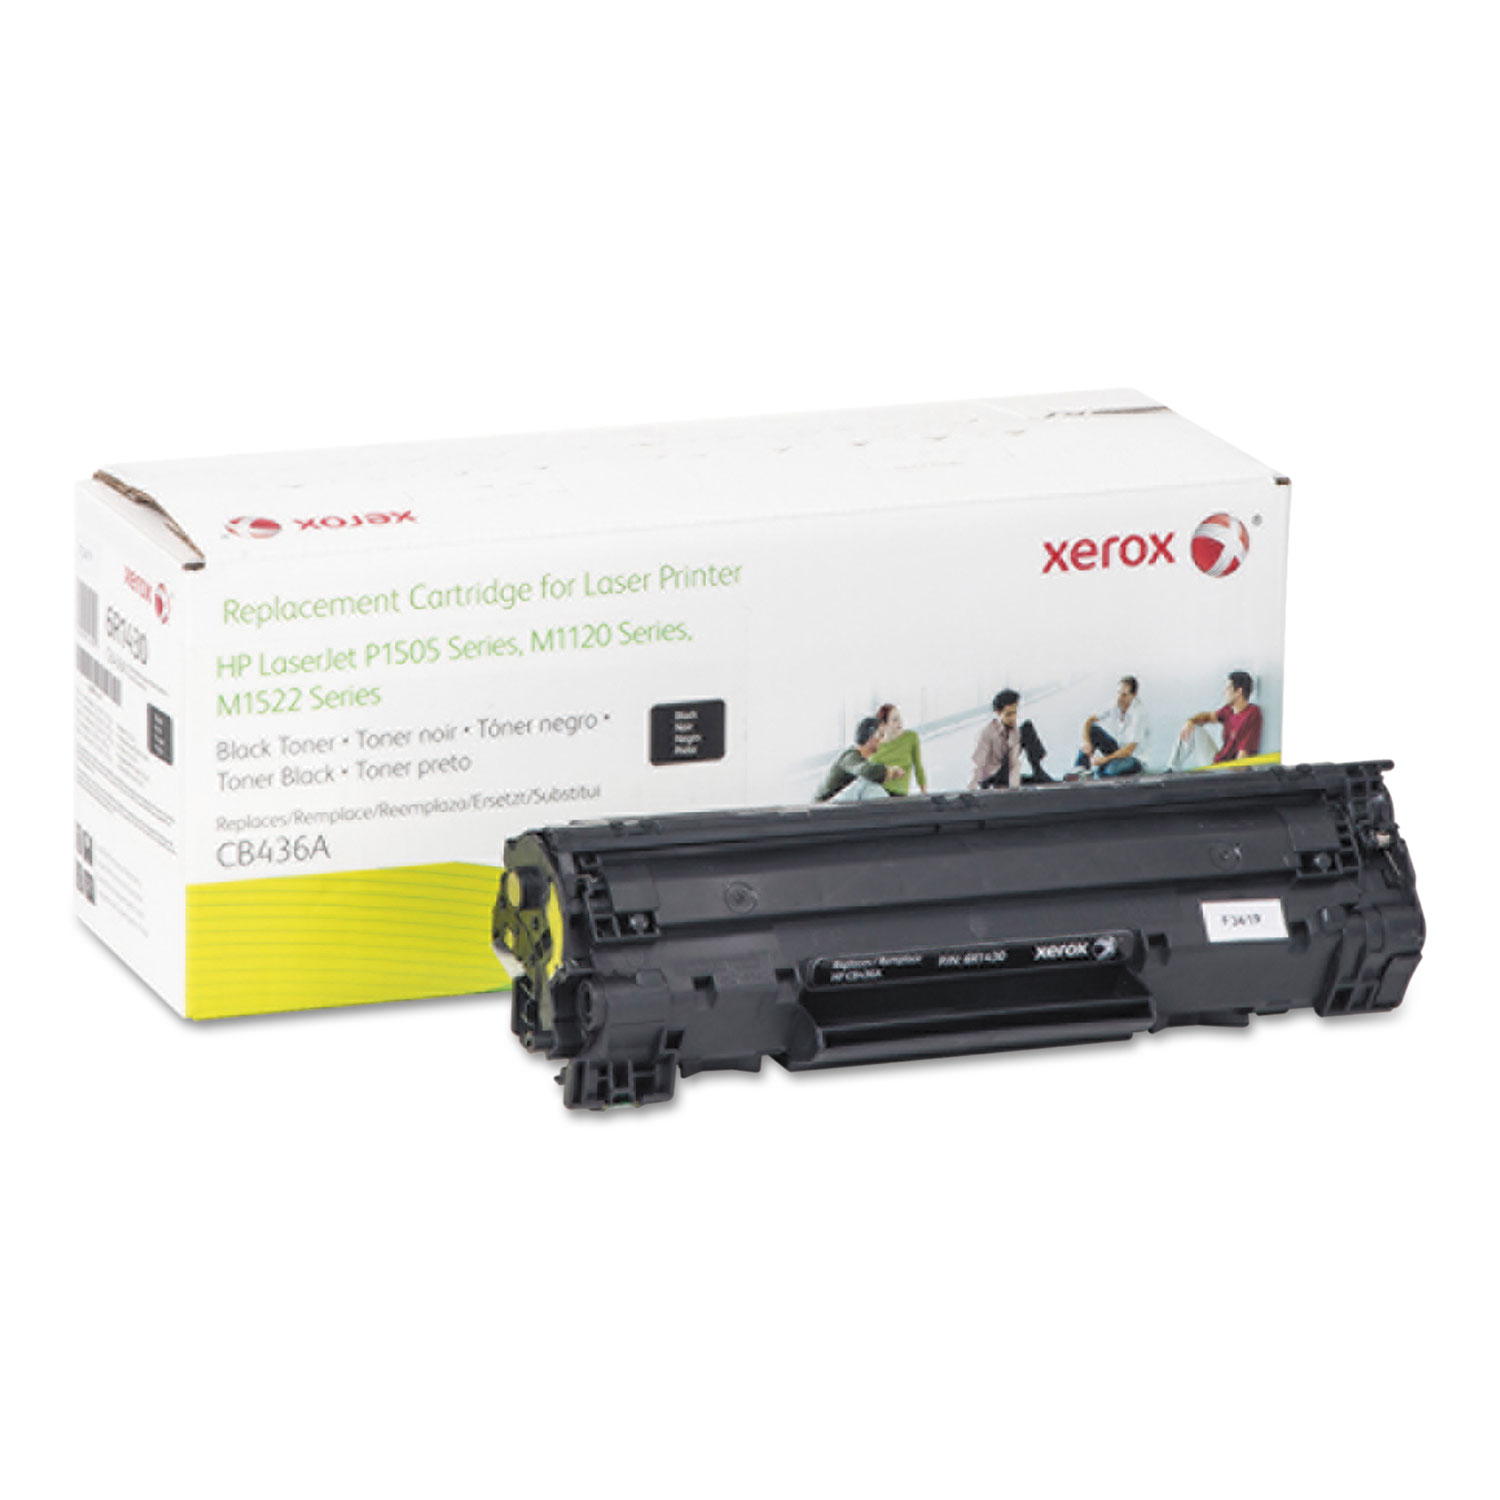  Xerox 006R01430 006R01430 Replacement Toner for CB436A (36A), Black (XER006R01430) 